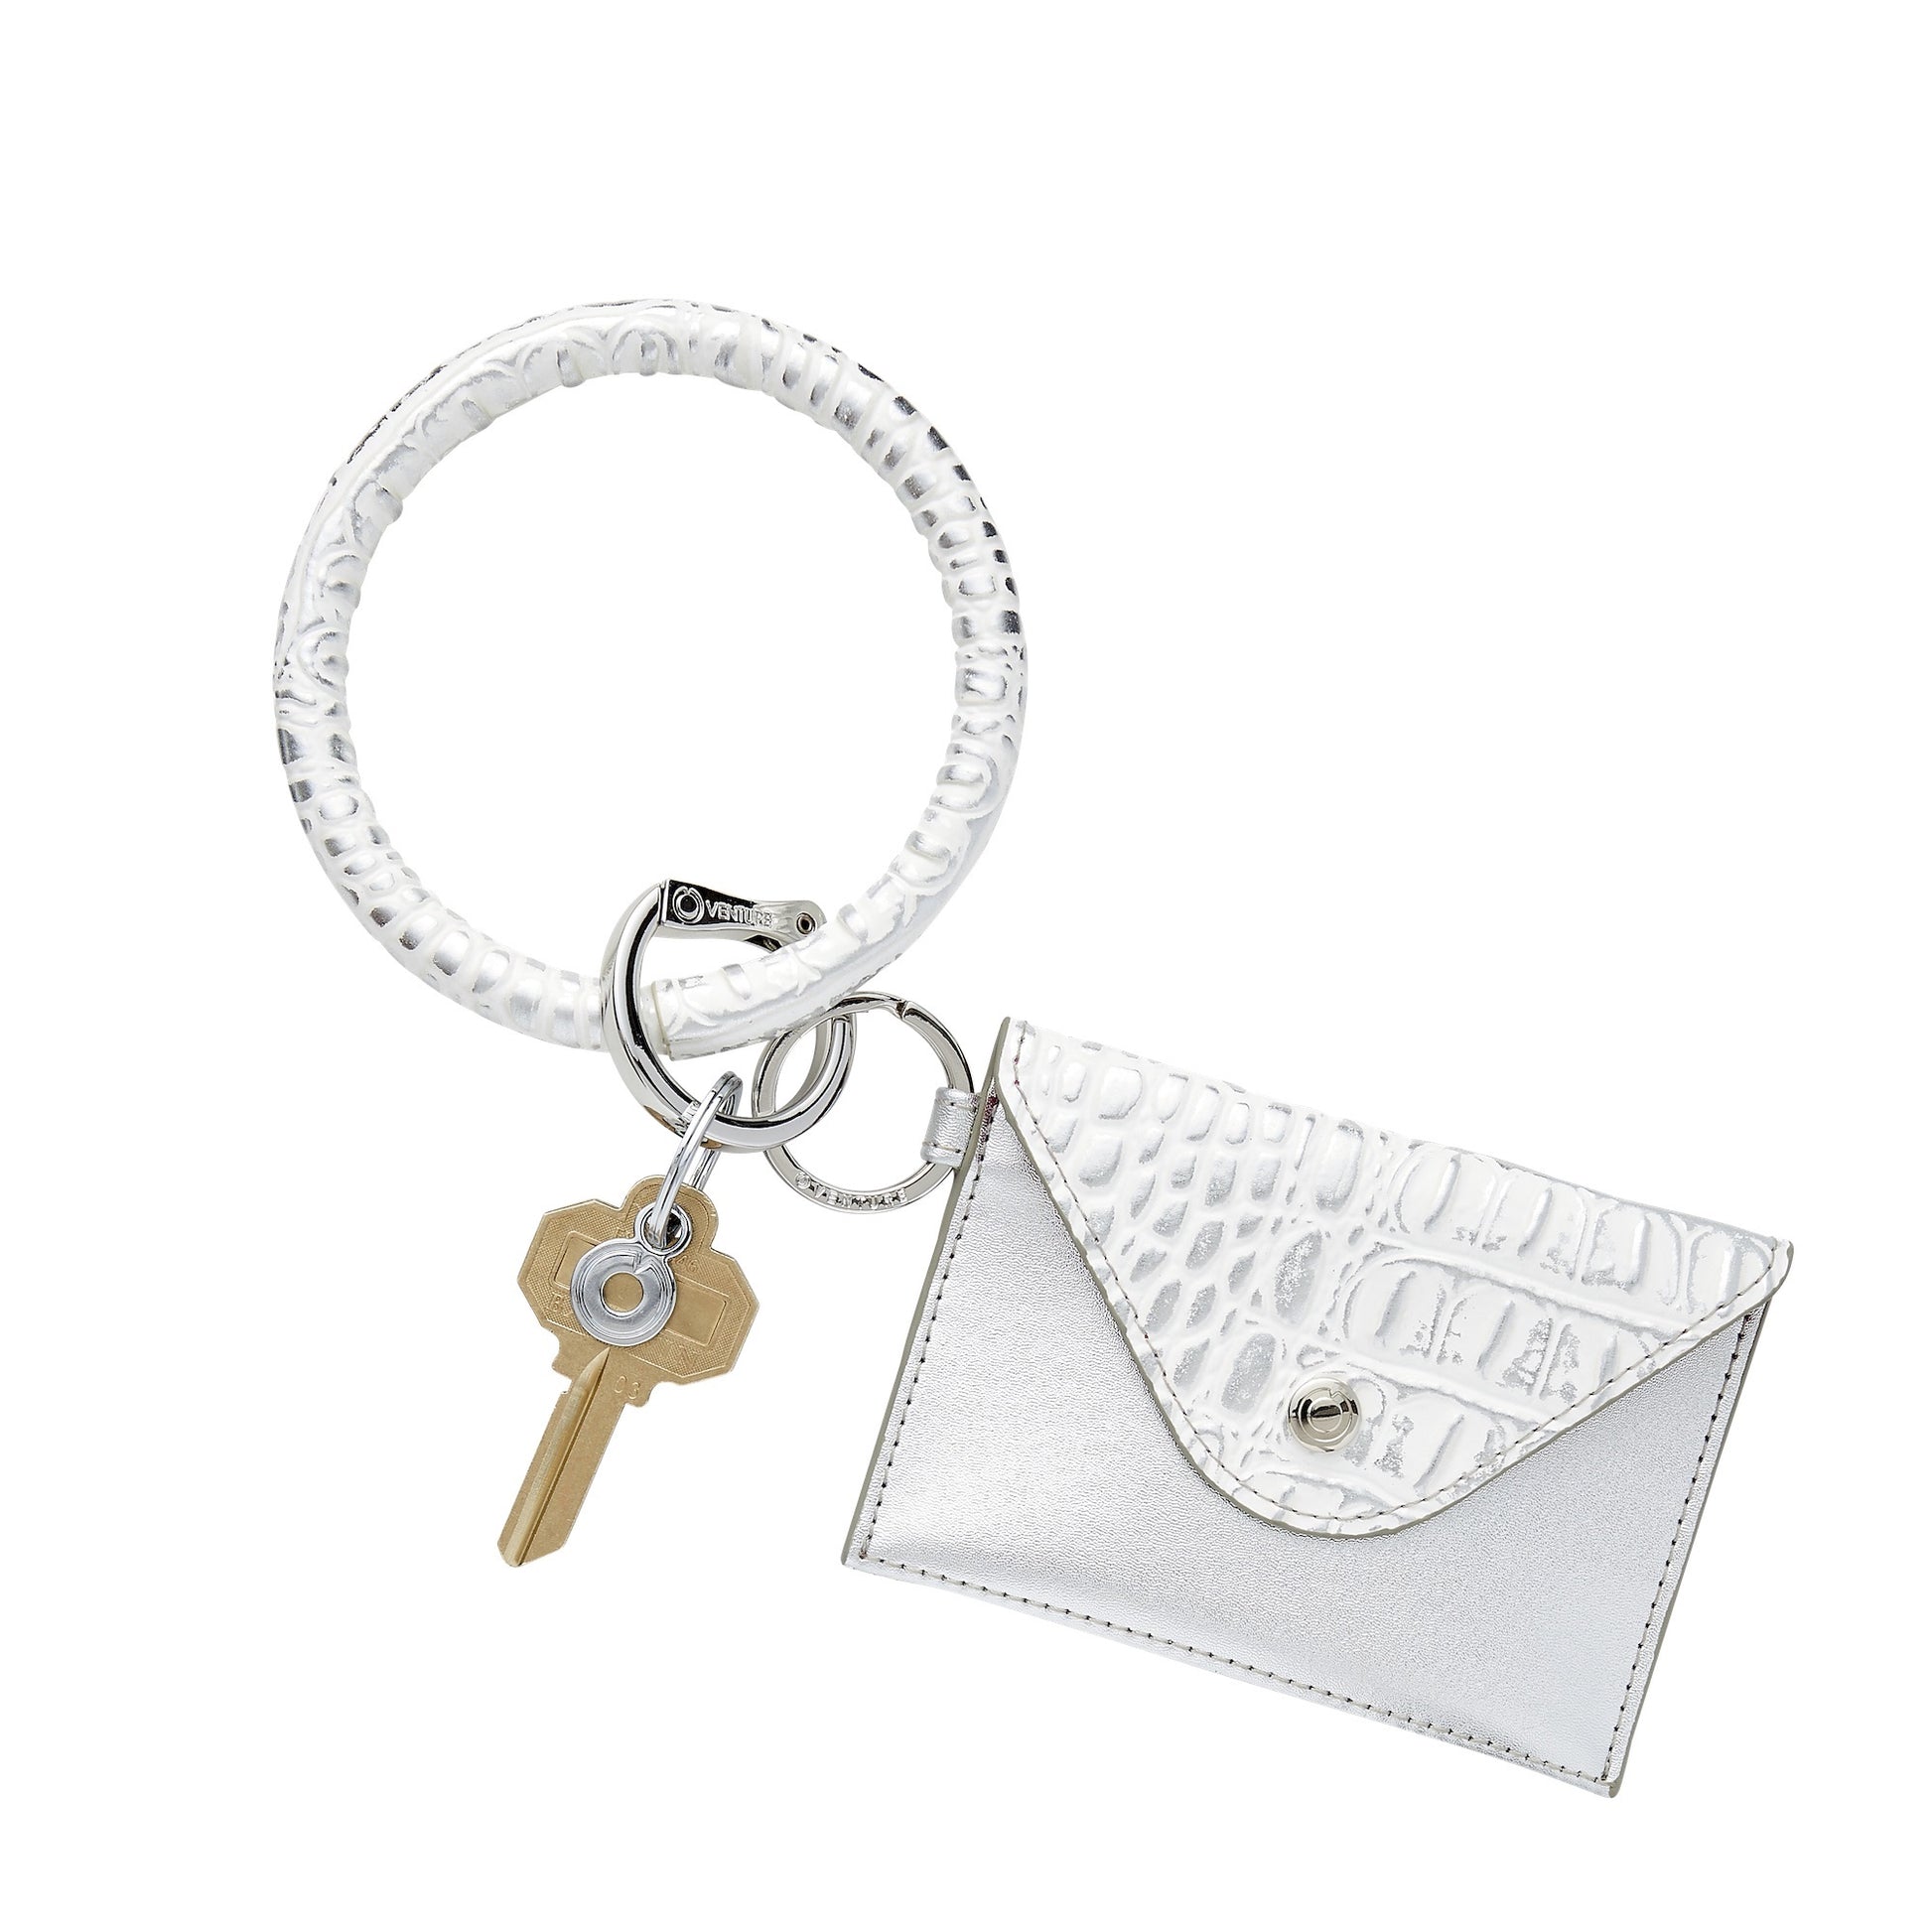 Stylish leather keychain wallet in mini envelope design.  Shown attached to the key ring bracelet in silver leather.